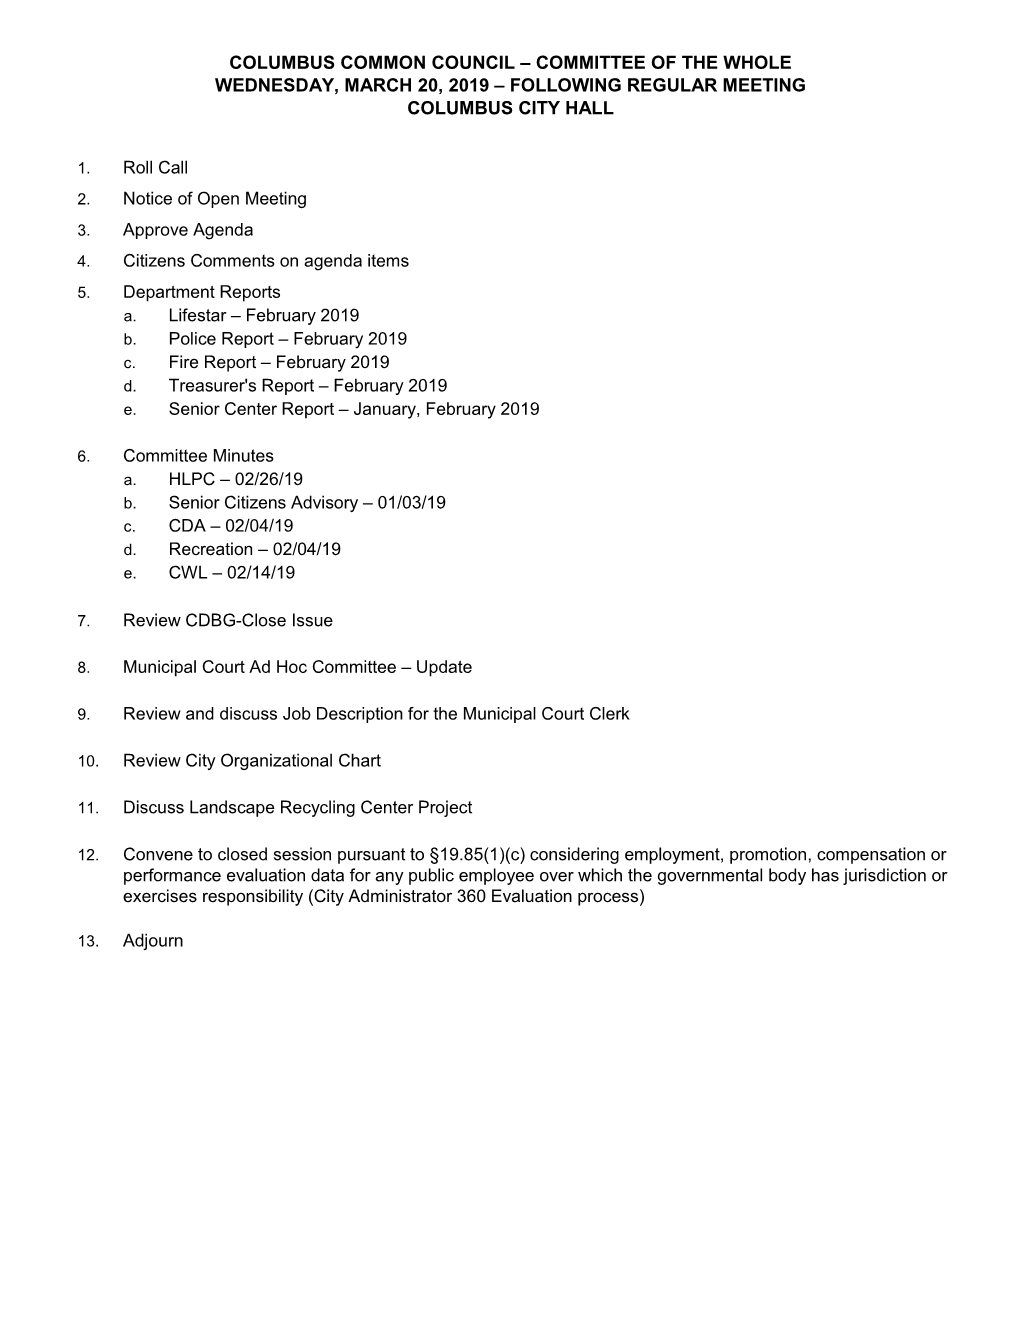 Committee of the Whole Wednesday, March 20, 2019 – Following Regular Meeting Columbus City Hall